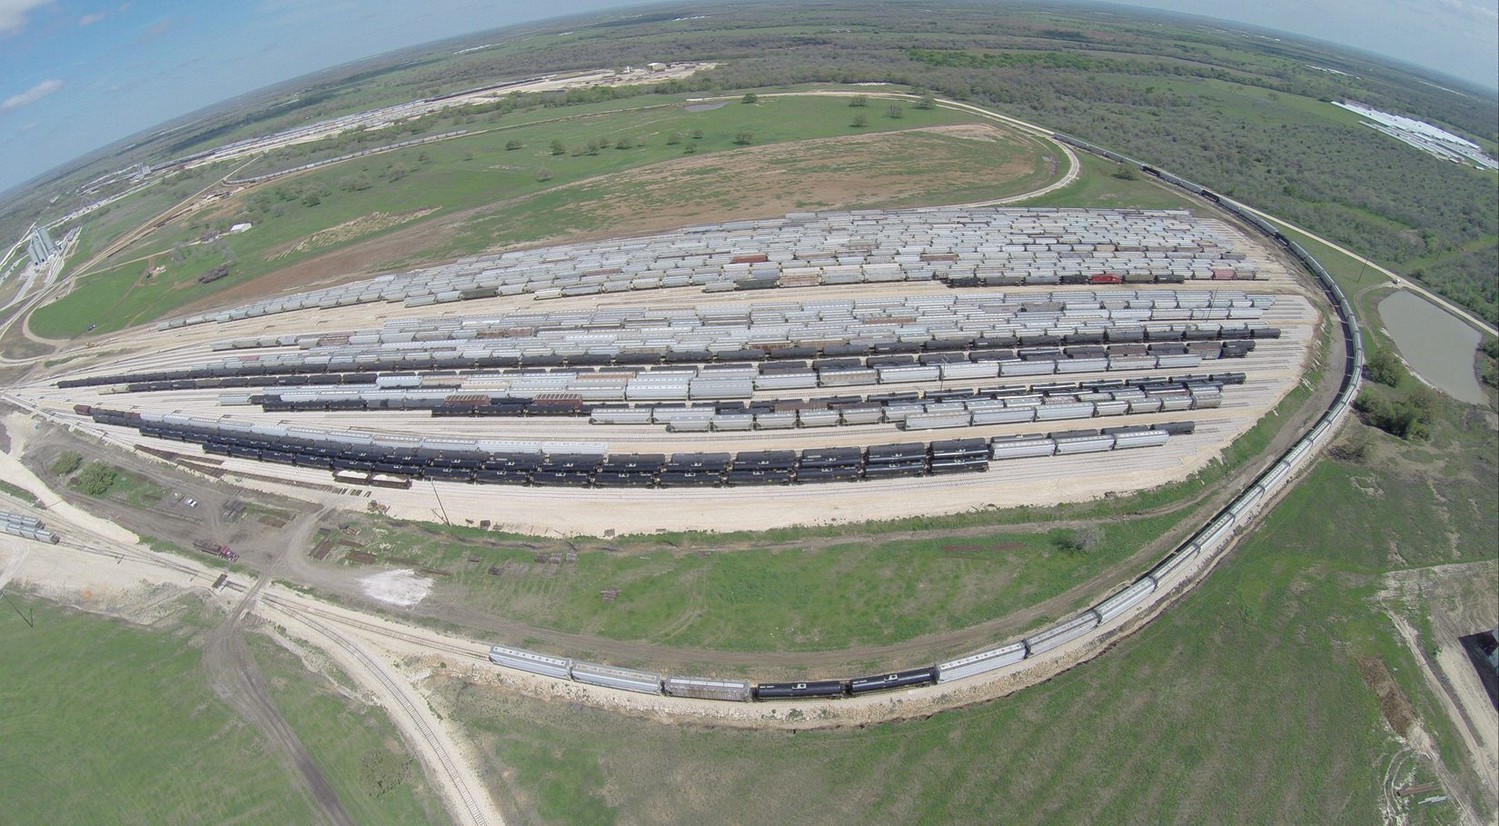 Texas Gonzales and Northern Railway (TXGN) provides rail transport, storage and operations for companies in Texas’ central heartland. Located midway between Gonzales and Harwood, TXGN owns and/or manages 13 miles of main track between Harwood and Gonzales, and approximately 50 miles of storage and loop track.